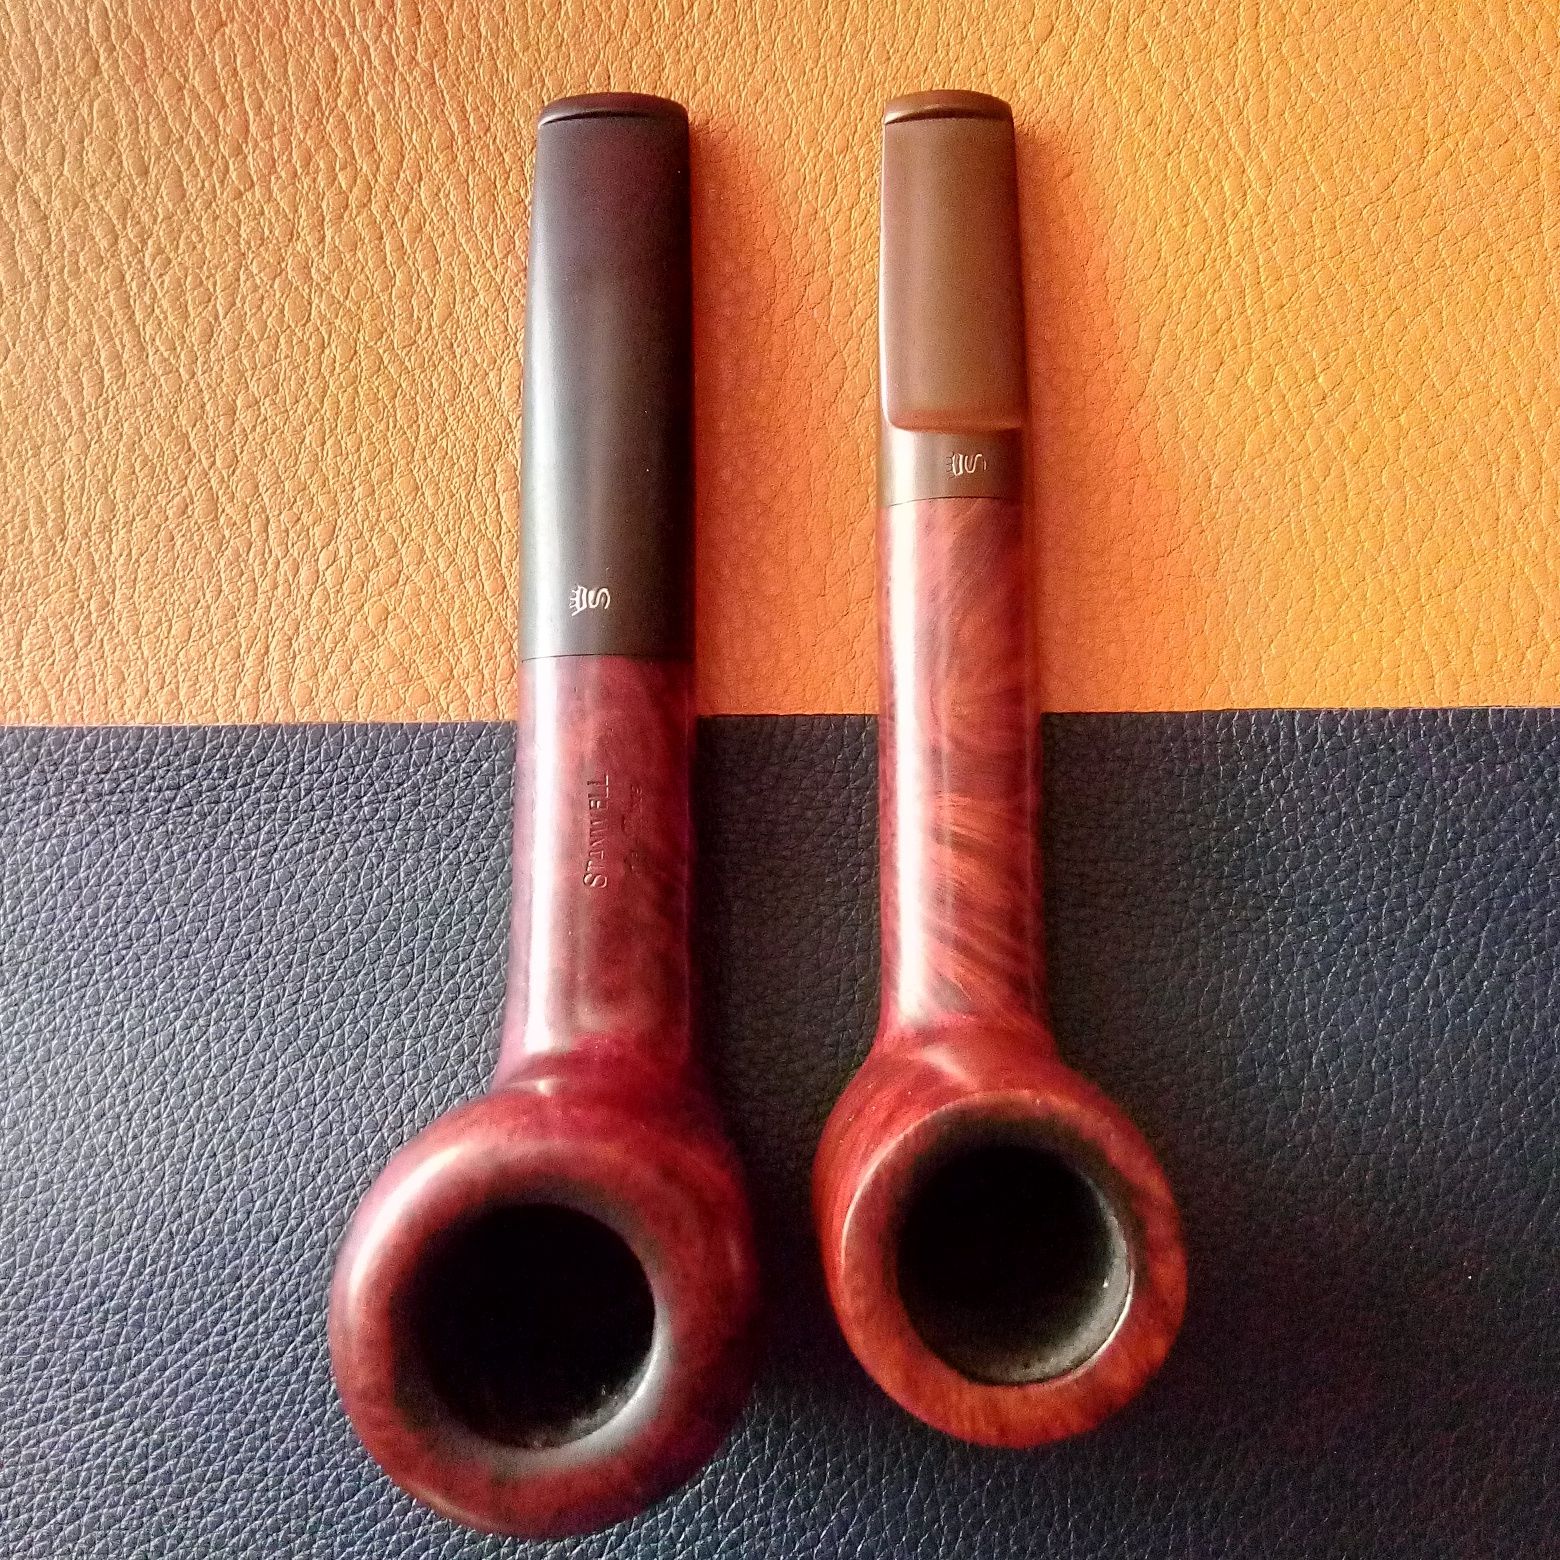 STANWELL de Luxe, dois cachimbos dinamarqueses